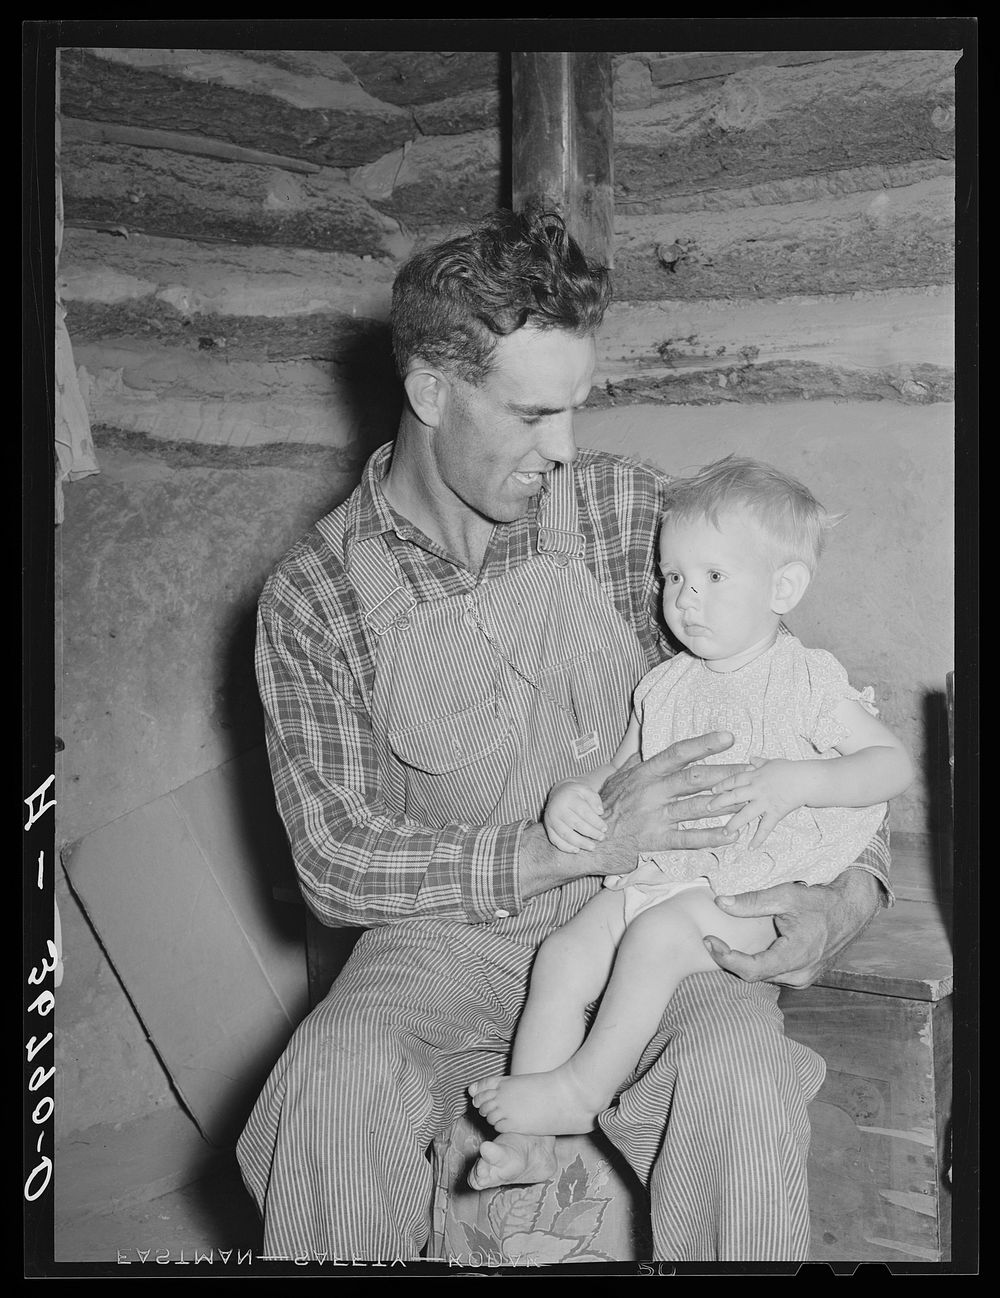 Jack Whinery, homesteader, with his baby son. Pie Town, New Mexico by Russell Lee